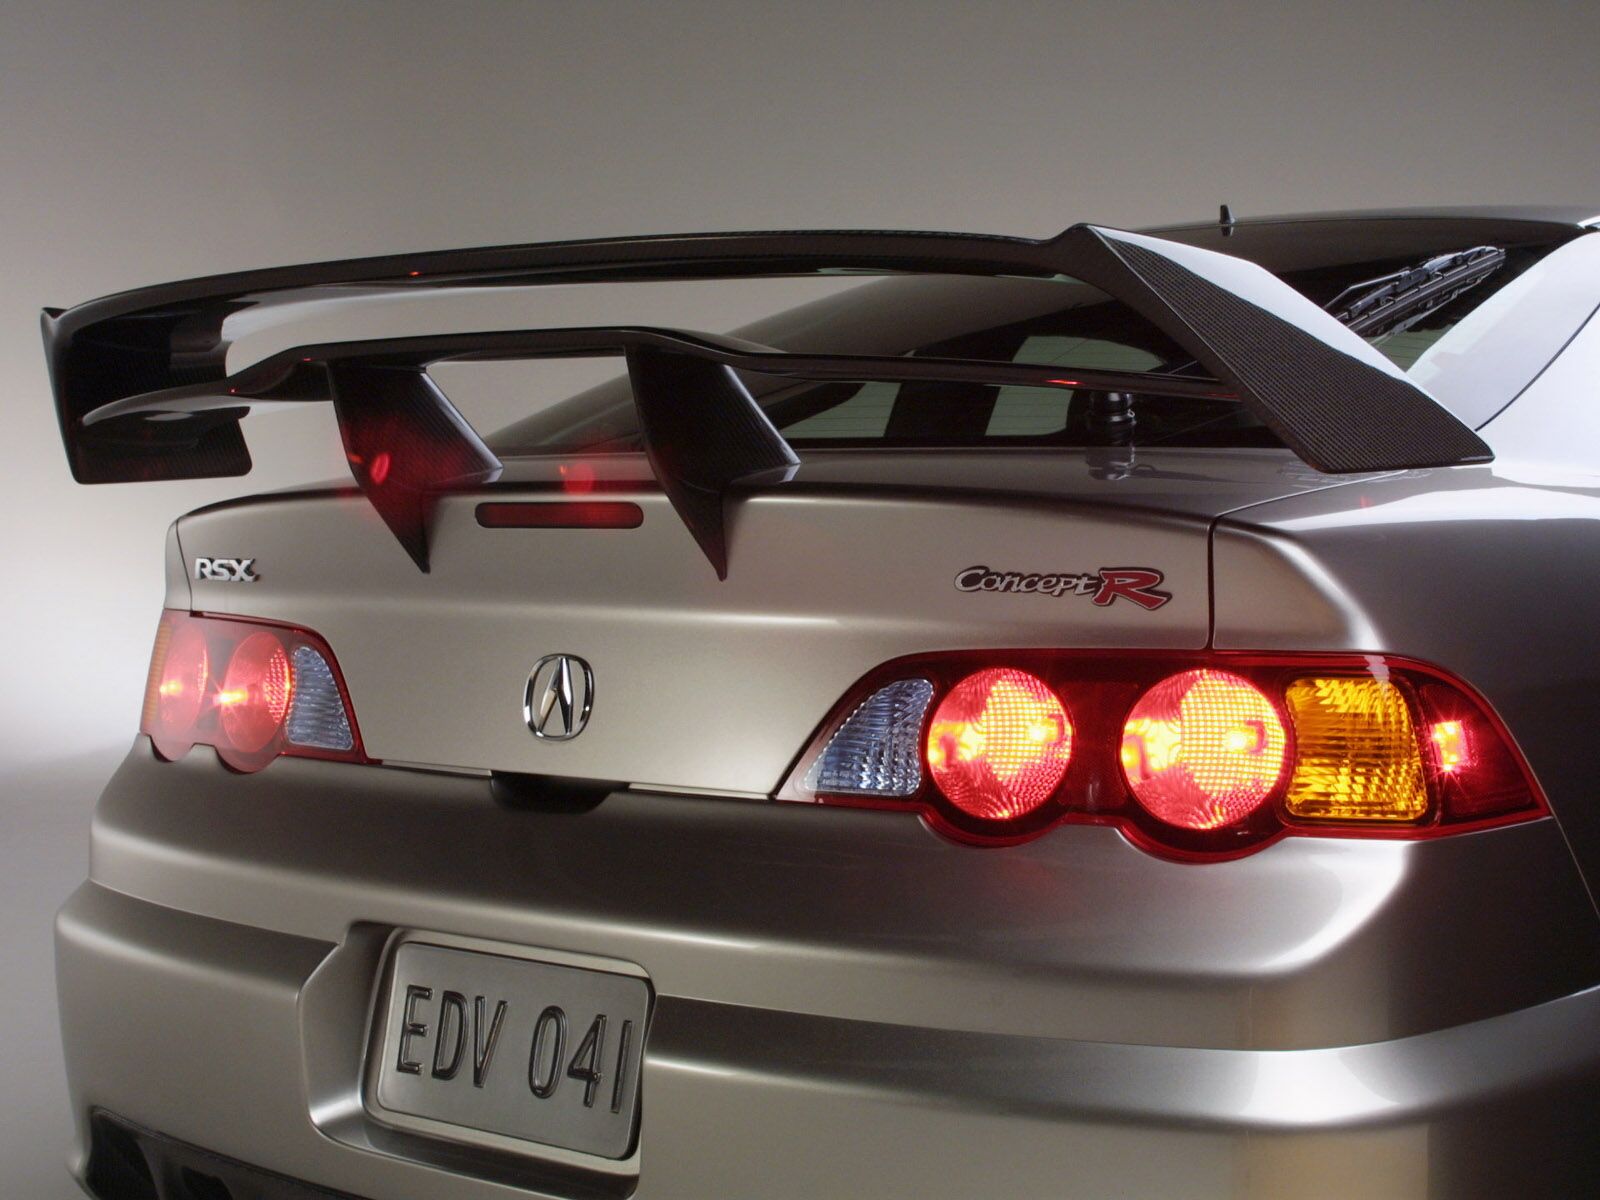 RSX A-Spec 2005 Concept Body Kit - Acura Forum : Acura Forums